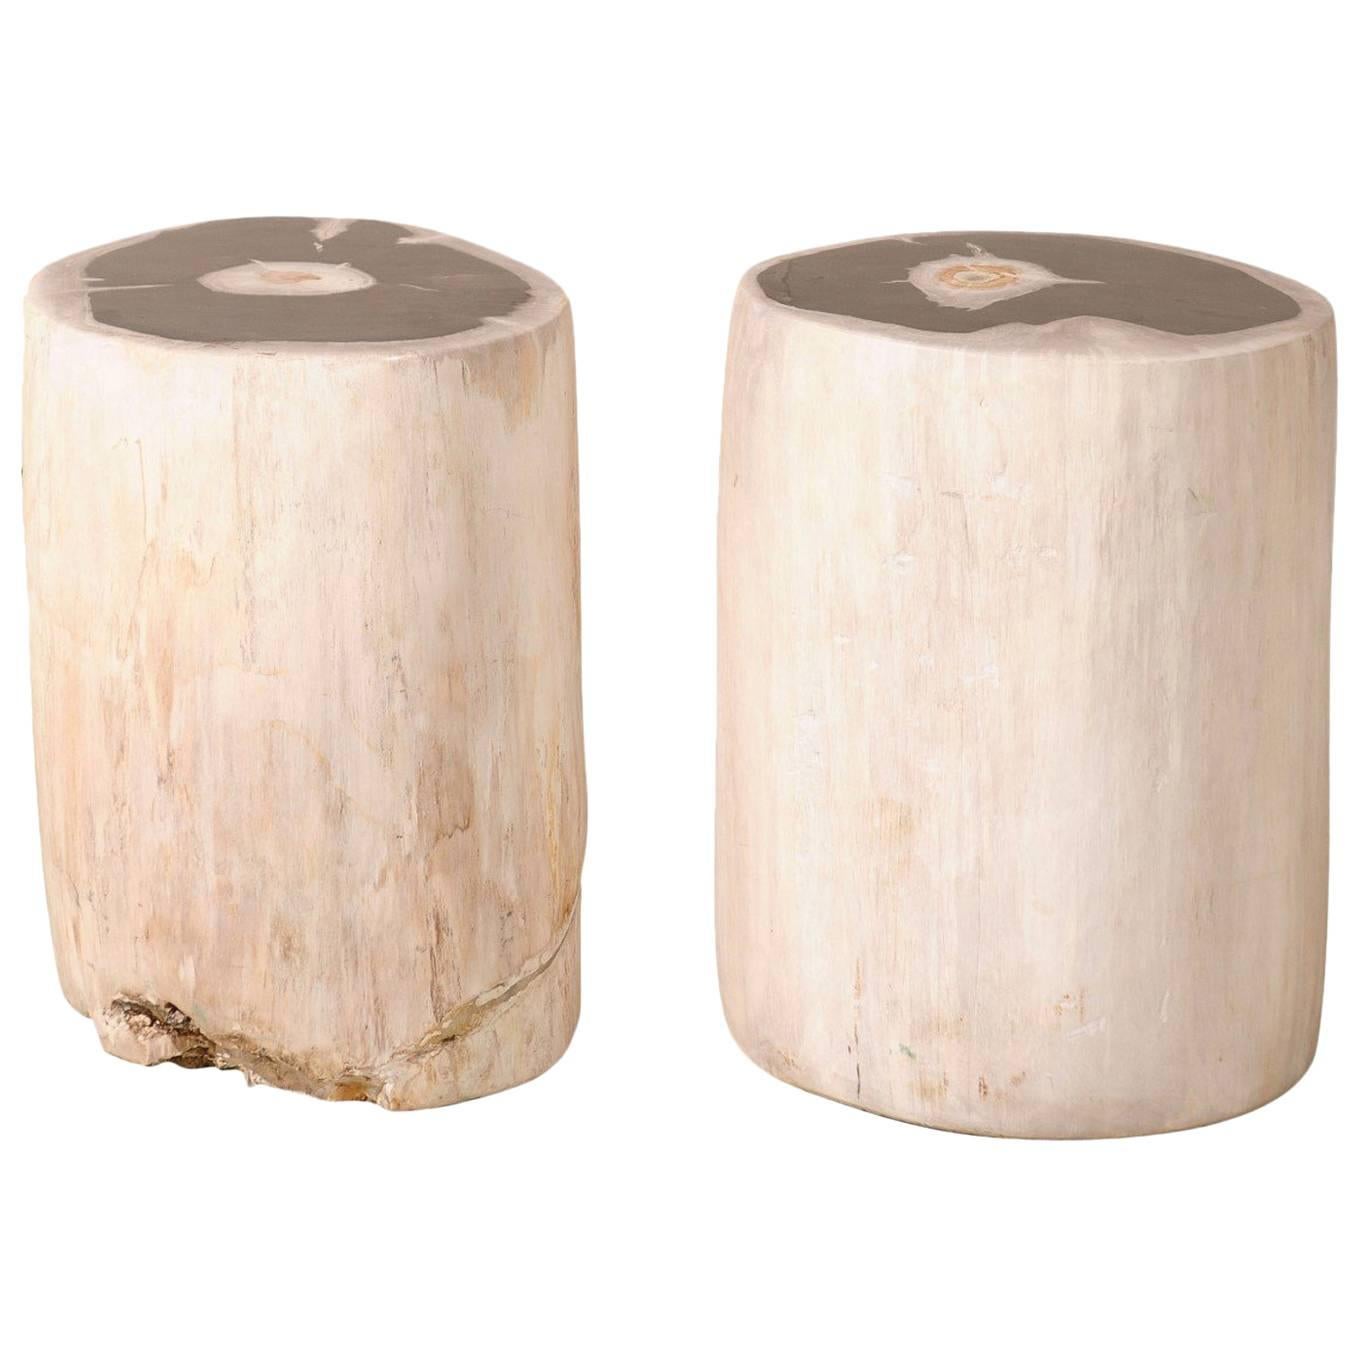 Pair of Sleek Petrified Wood Drink / Side Tables in Cream Color with Black Tops